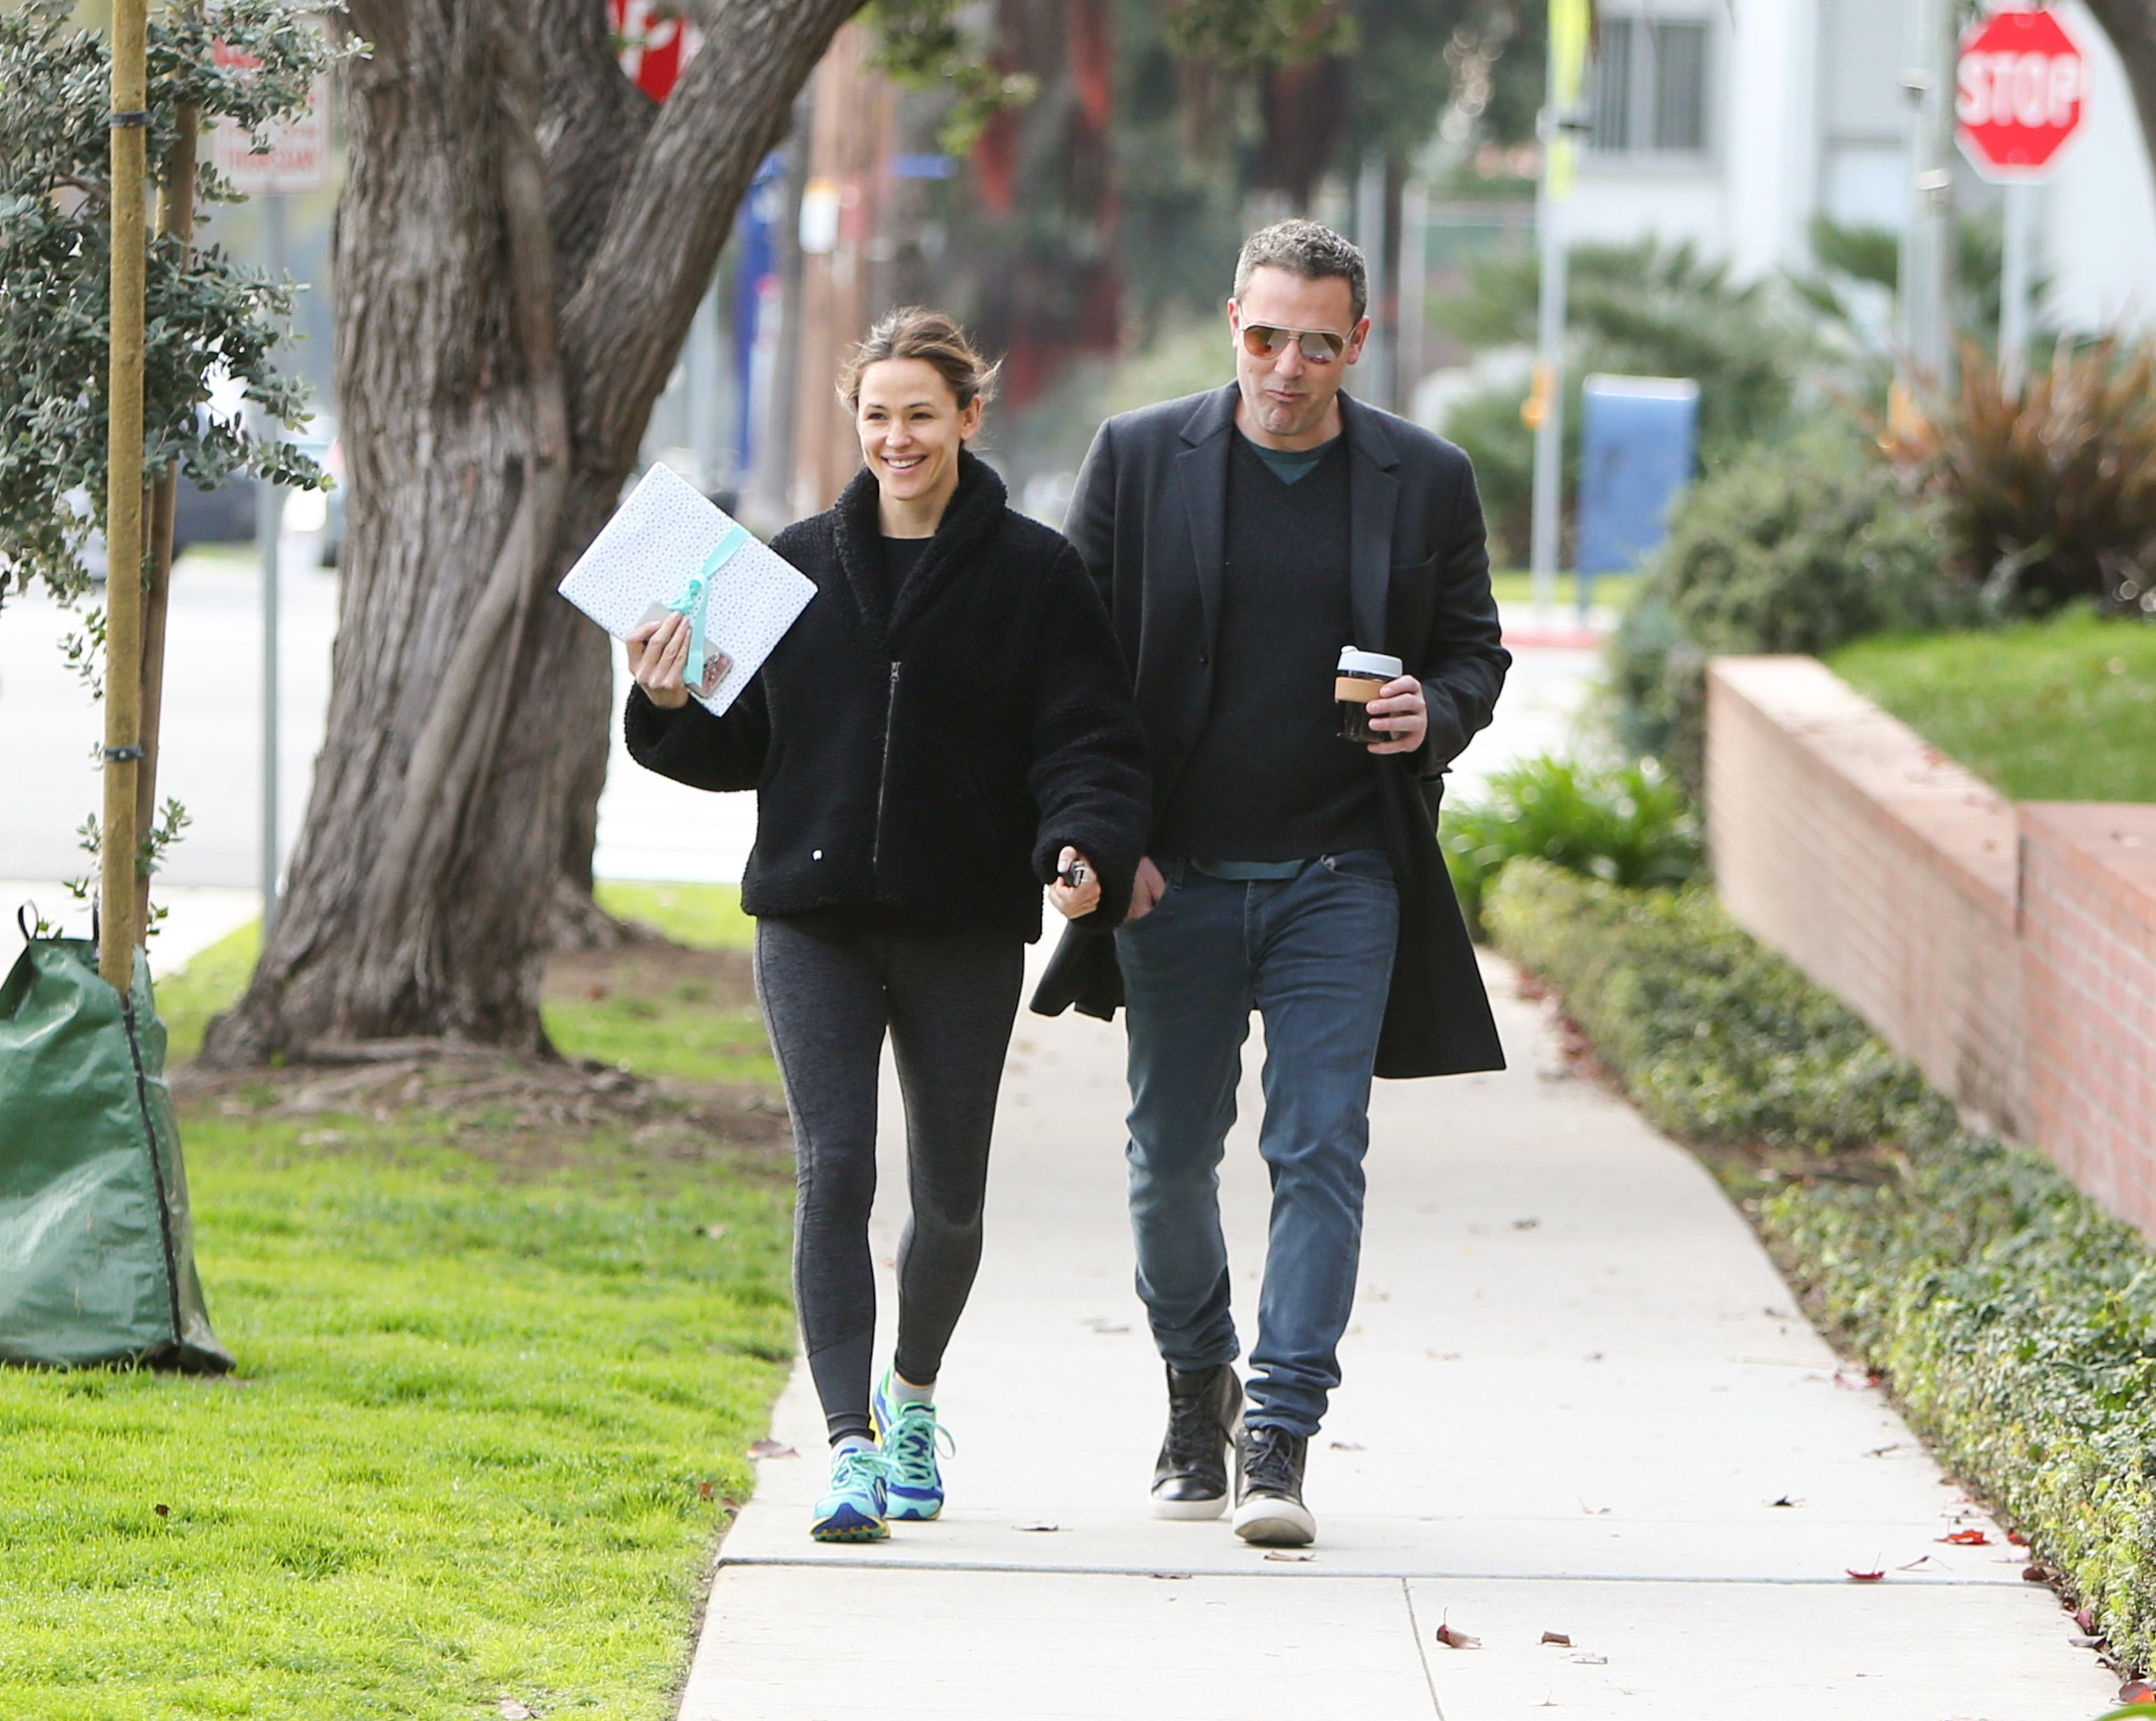 Jennifer Garner and Ben Affleck in Los Angeles, California on February 27, 2019 | Source: Getty Images